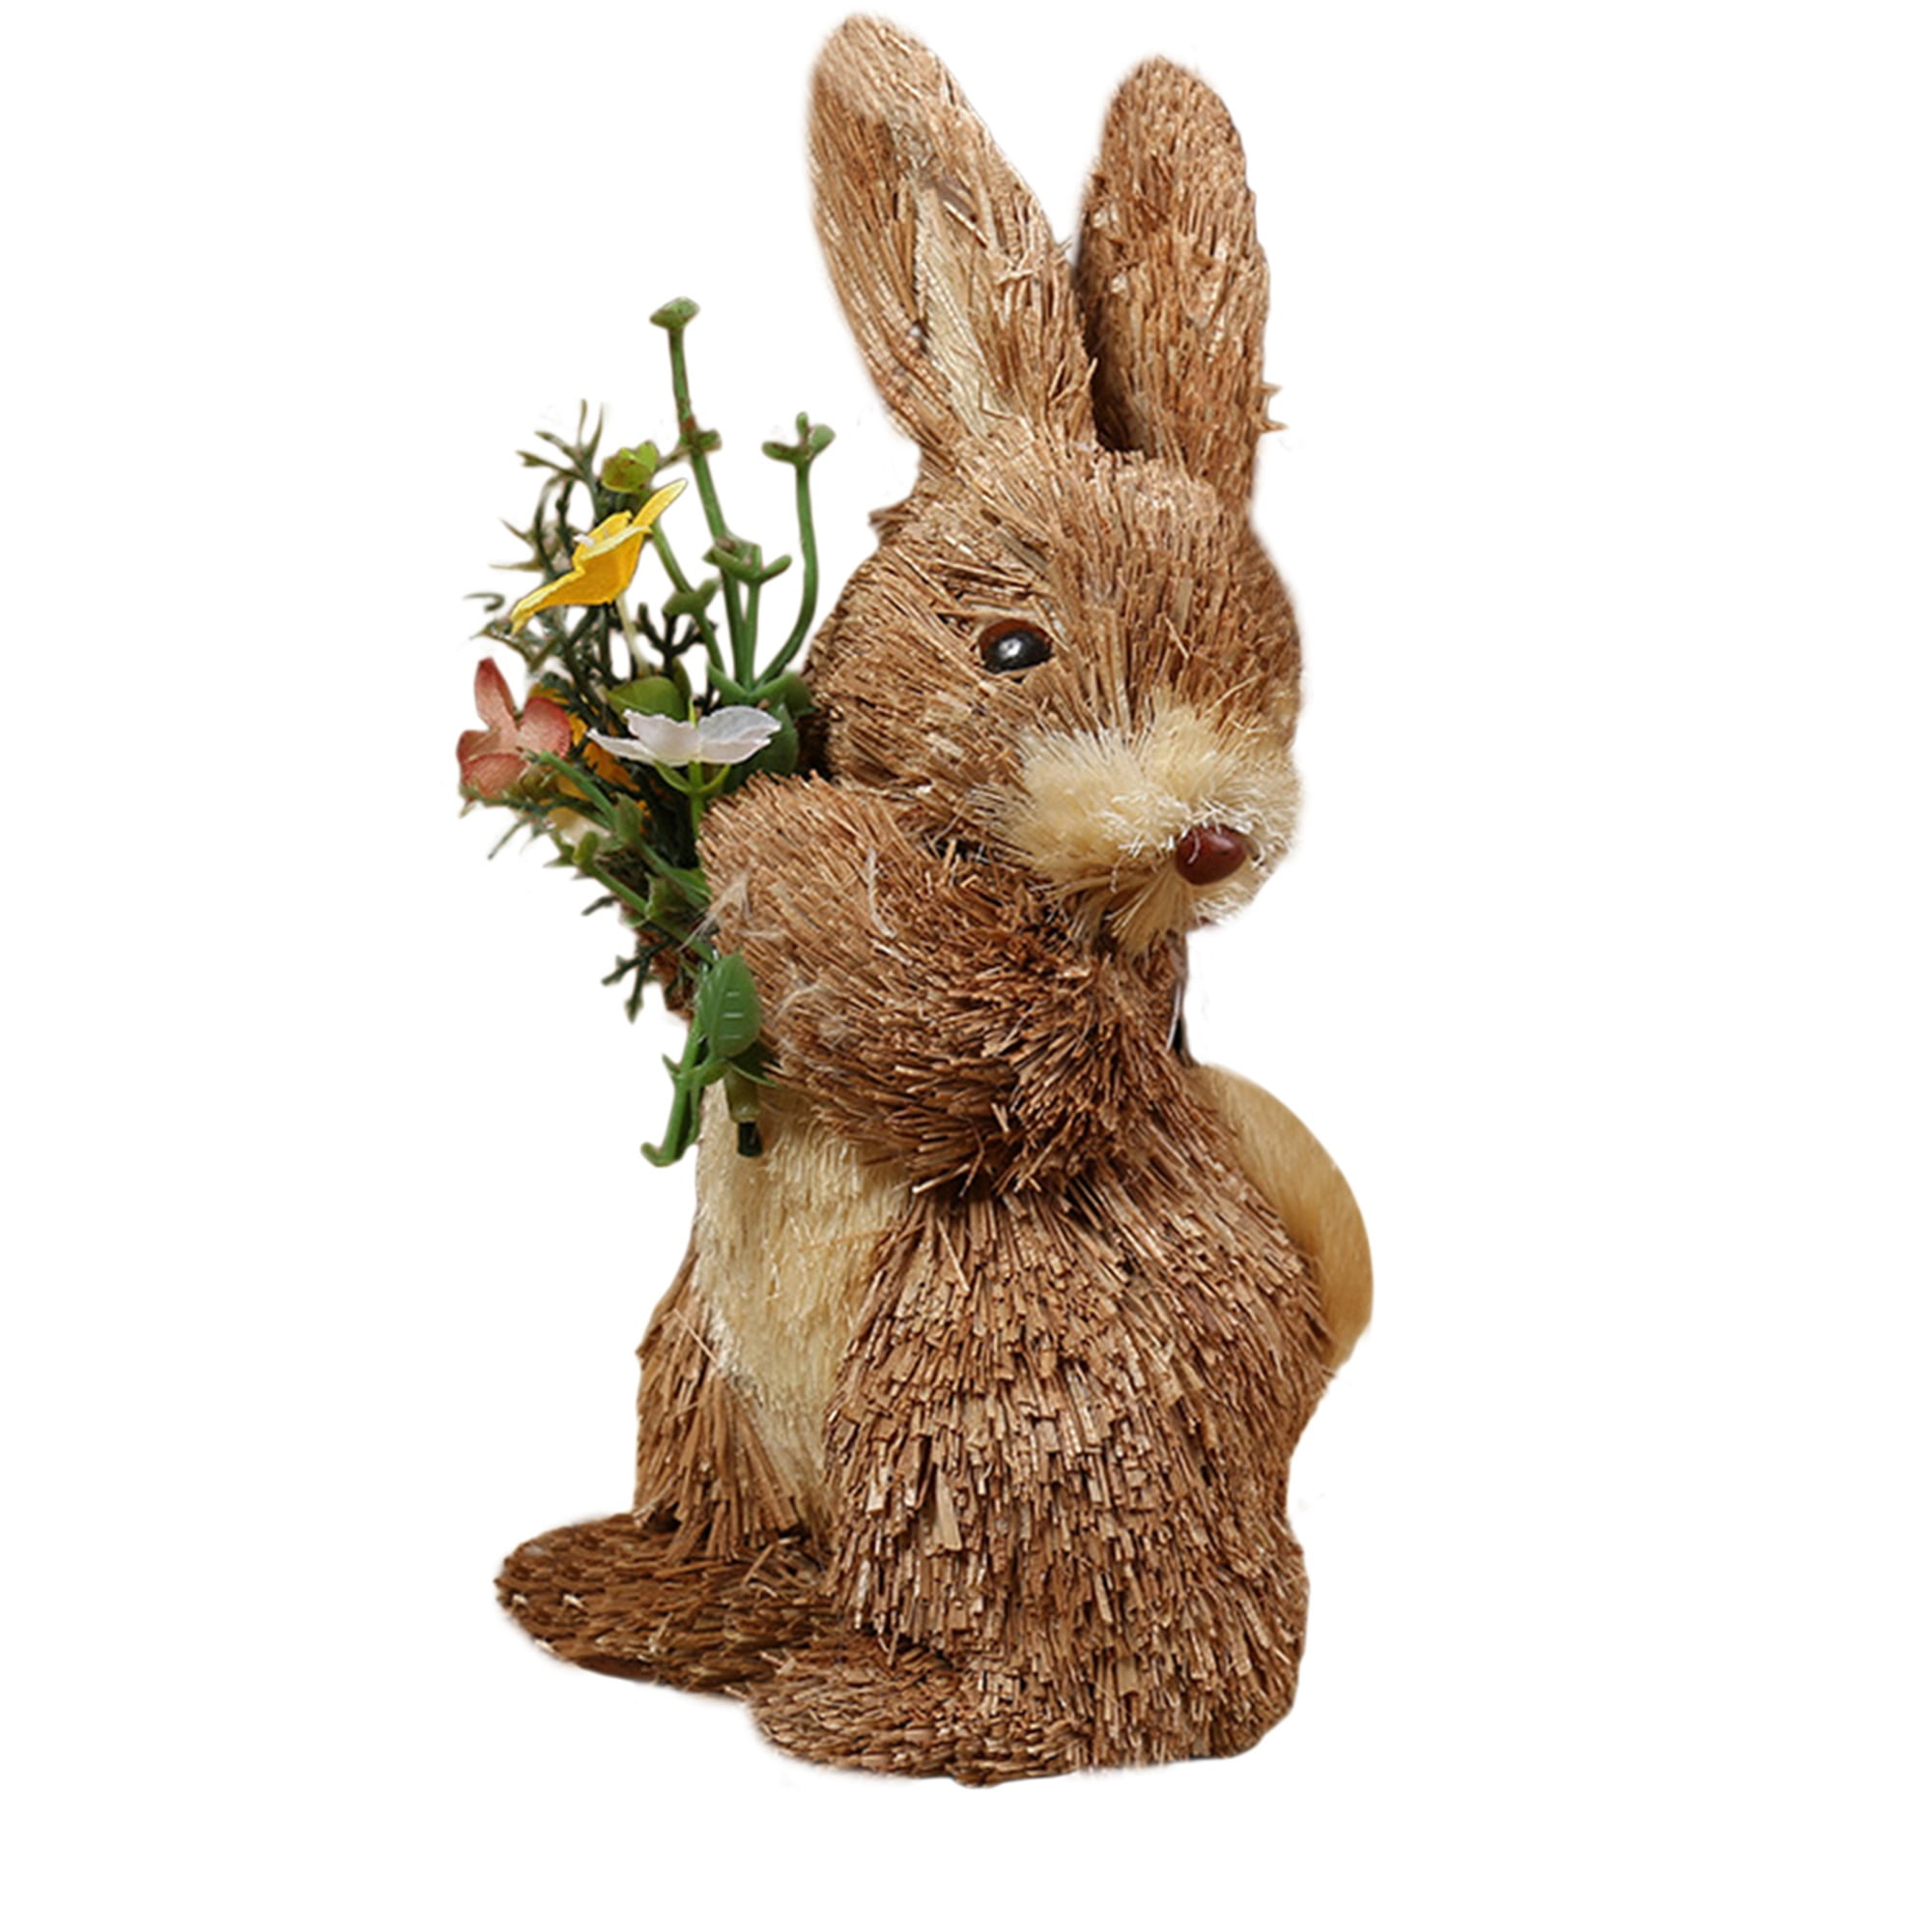 Details about   Straw Rabbit Easter Ornament Standing Bunny Statue Figurine Spring Party Decor 